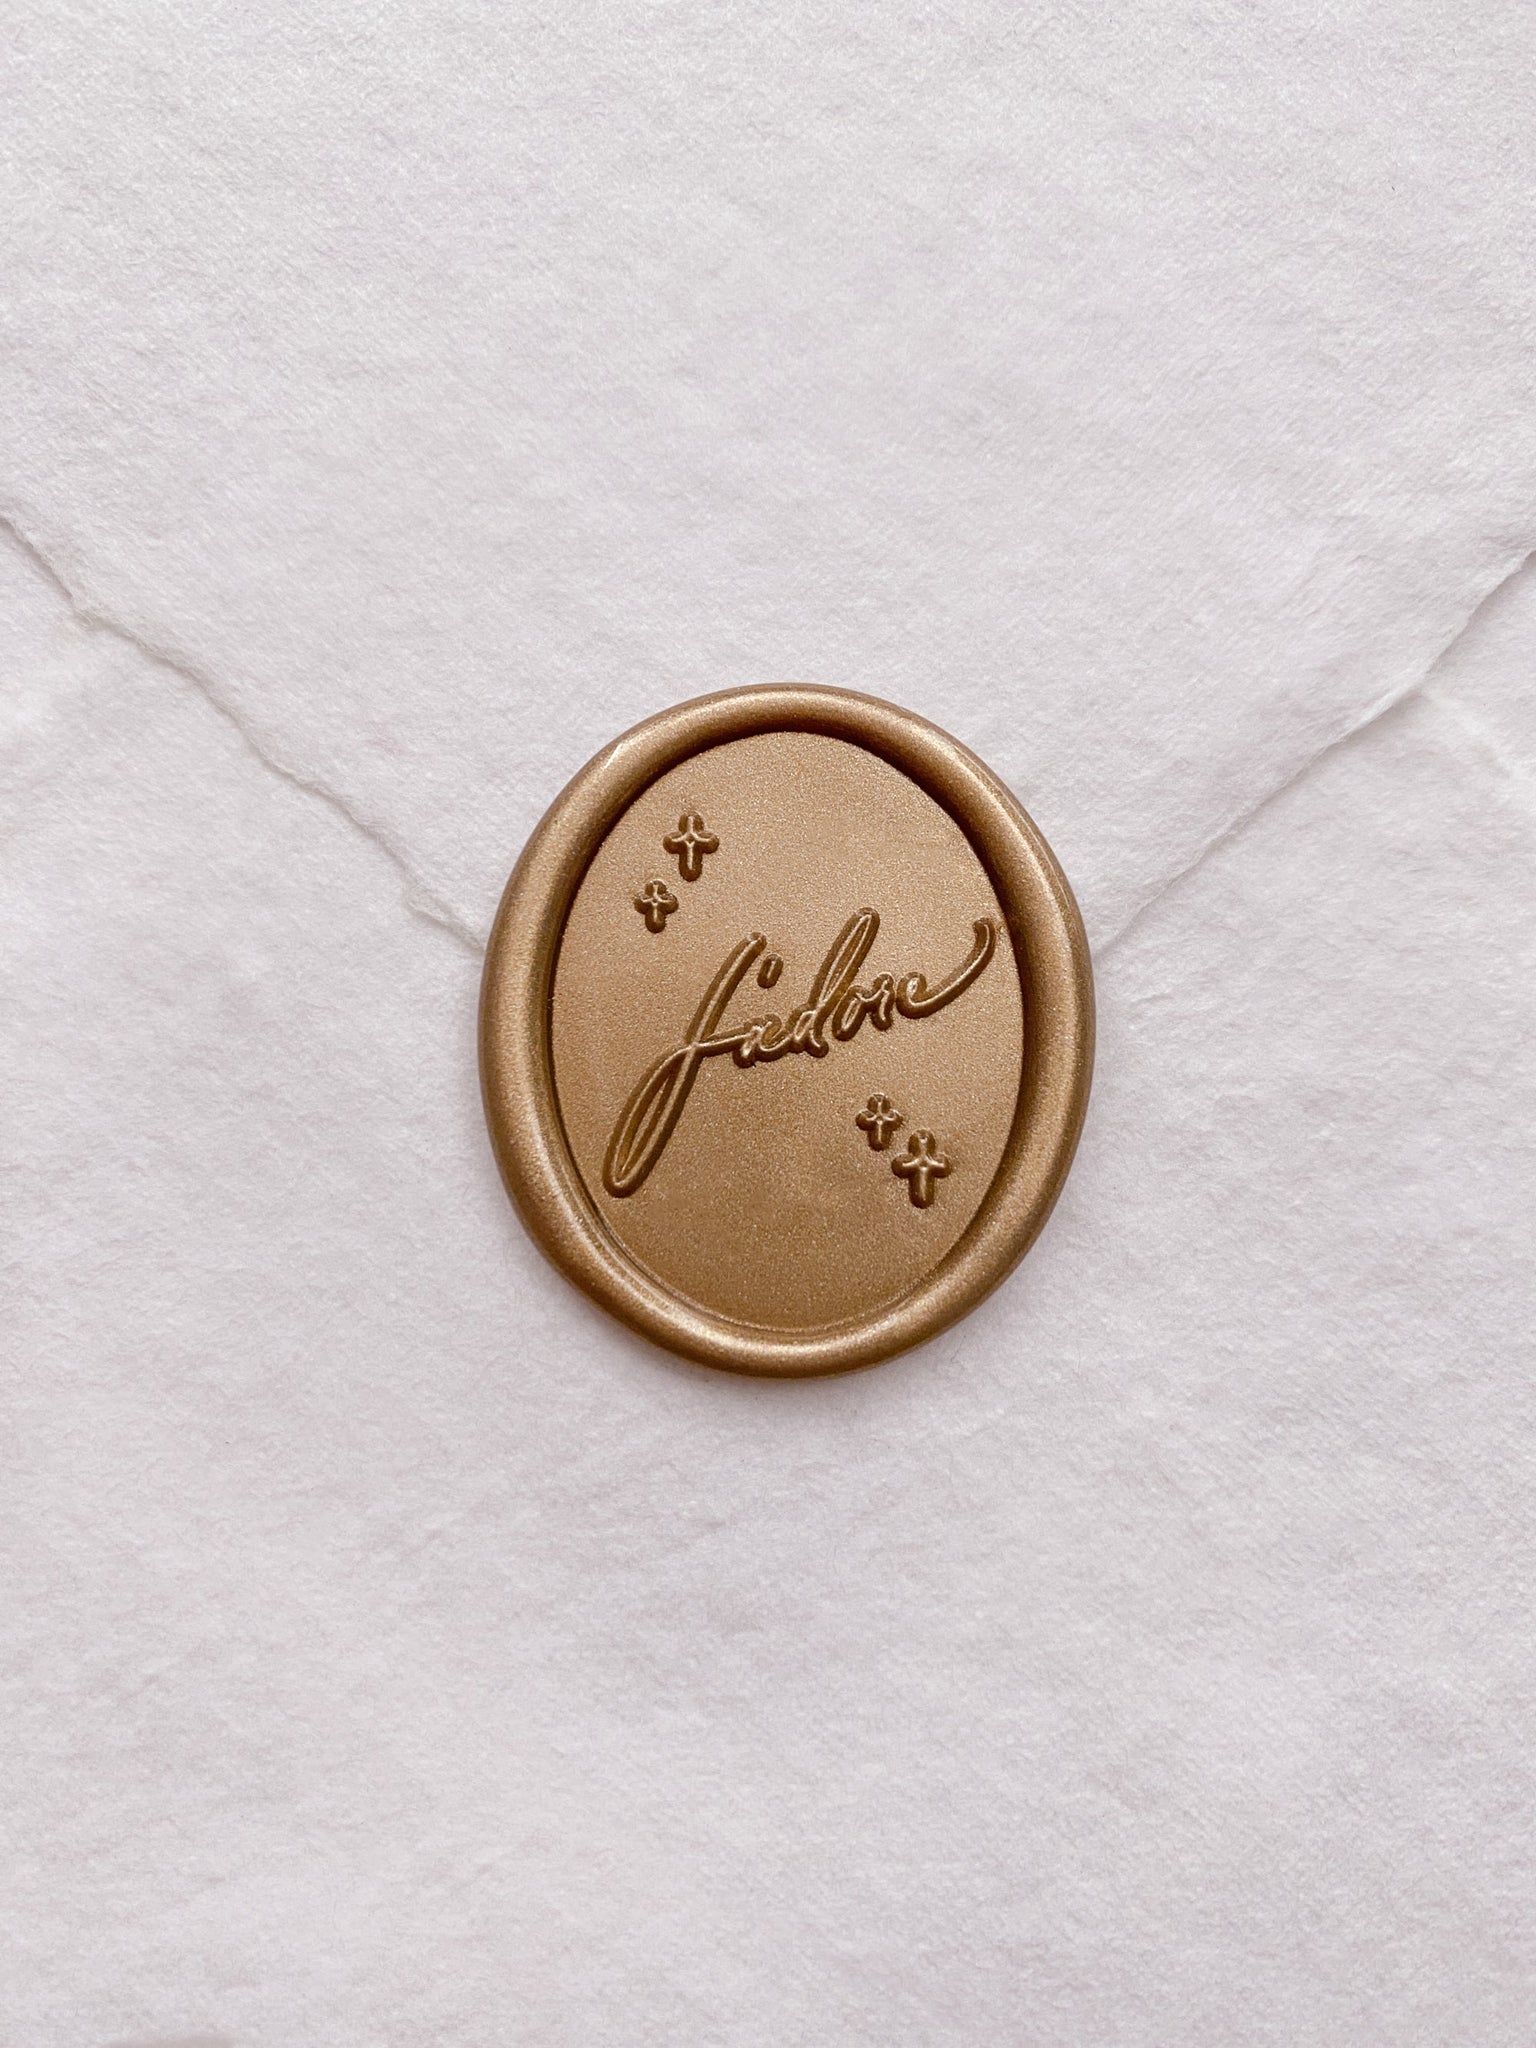 J'adore oval wax seal in gold on handmade paper envelope